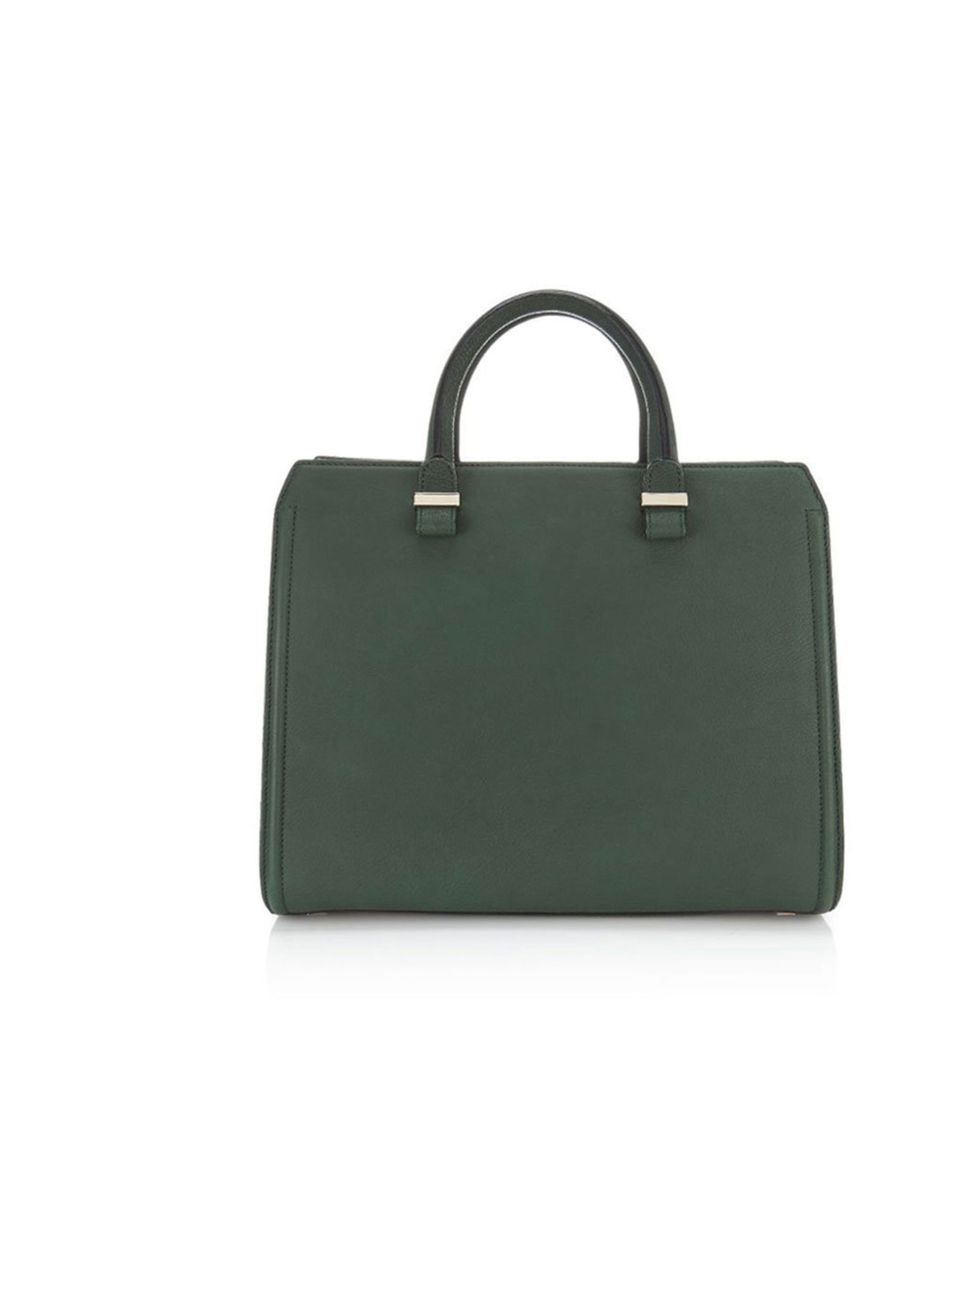 <p>Victoria Beckham 'Victoria' leather tote, was £2,300 now £1,610, at <a href="http://www.harrods.com/">Harrods</a></p>